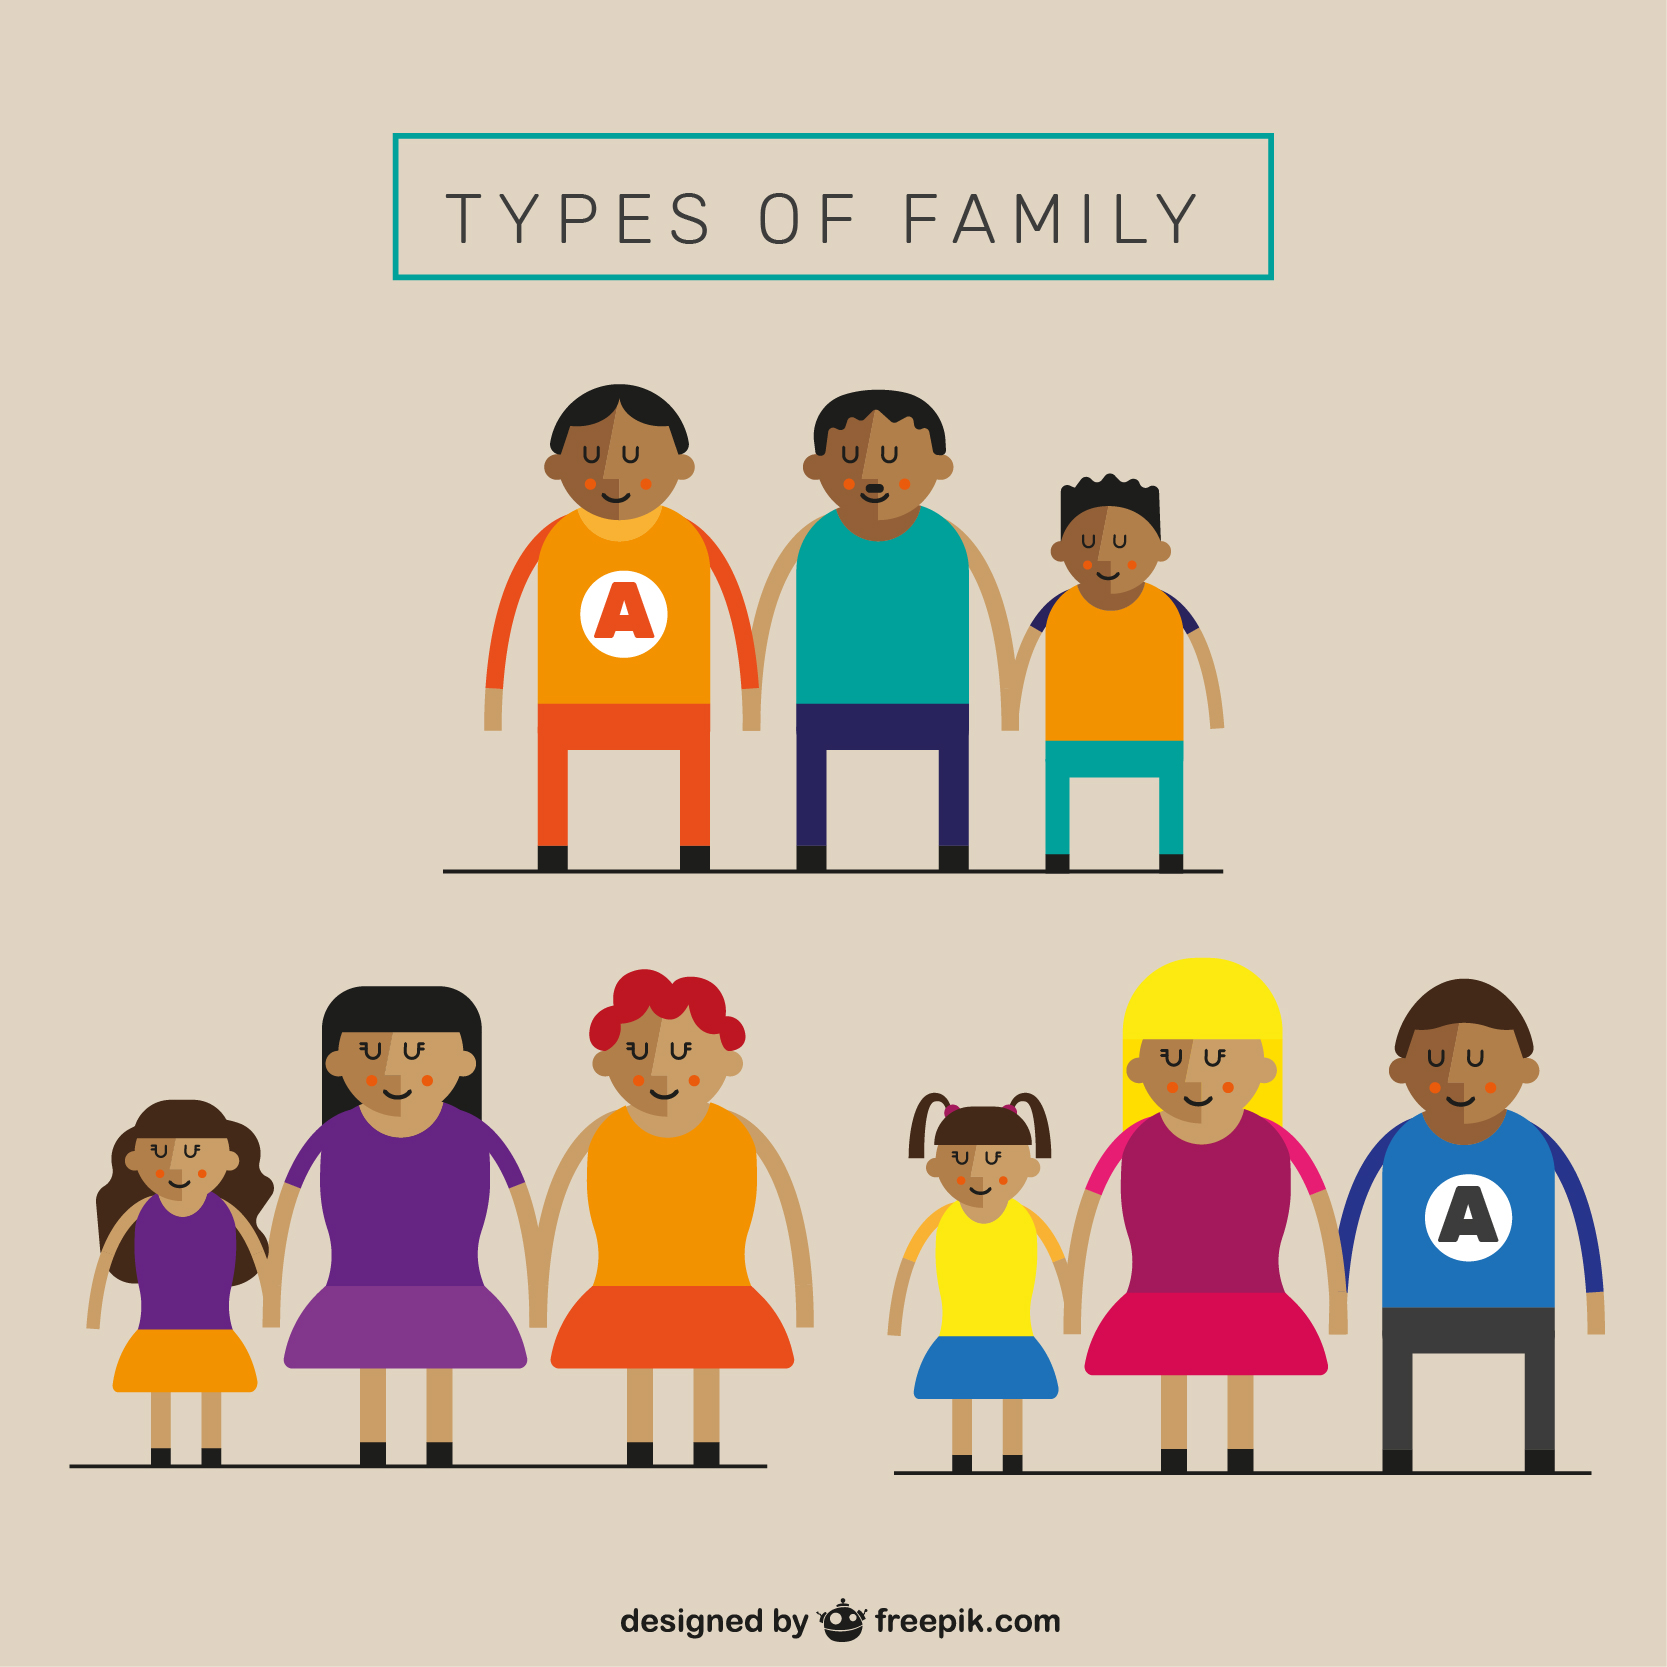 Types of family